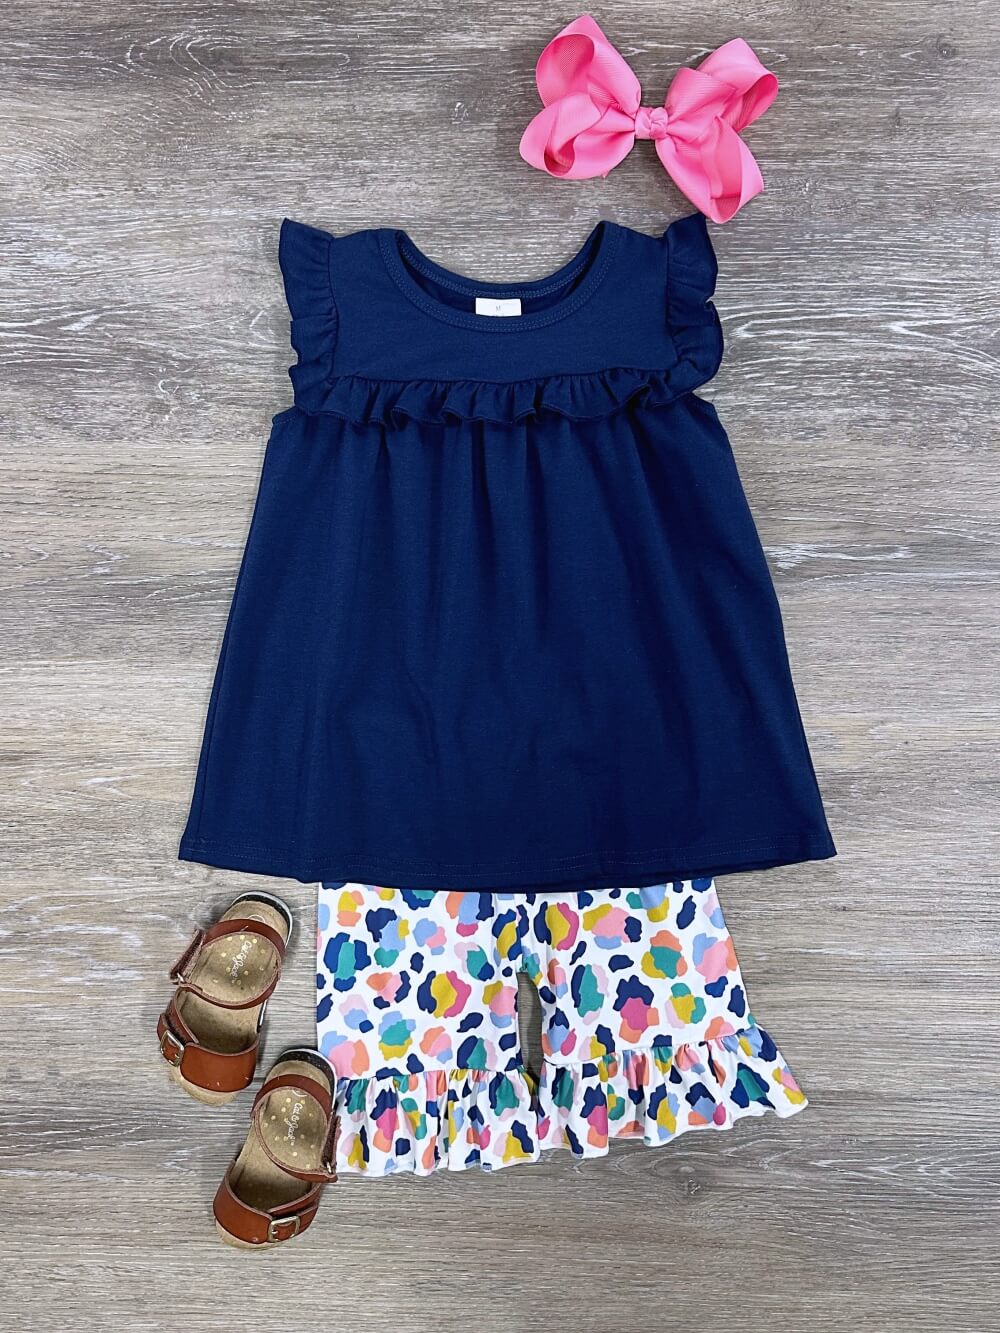 Navy & Leopard Girls Sleeveless Top & Shorts Outfit - Sydney So Sweet